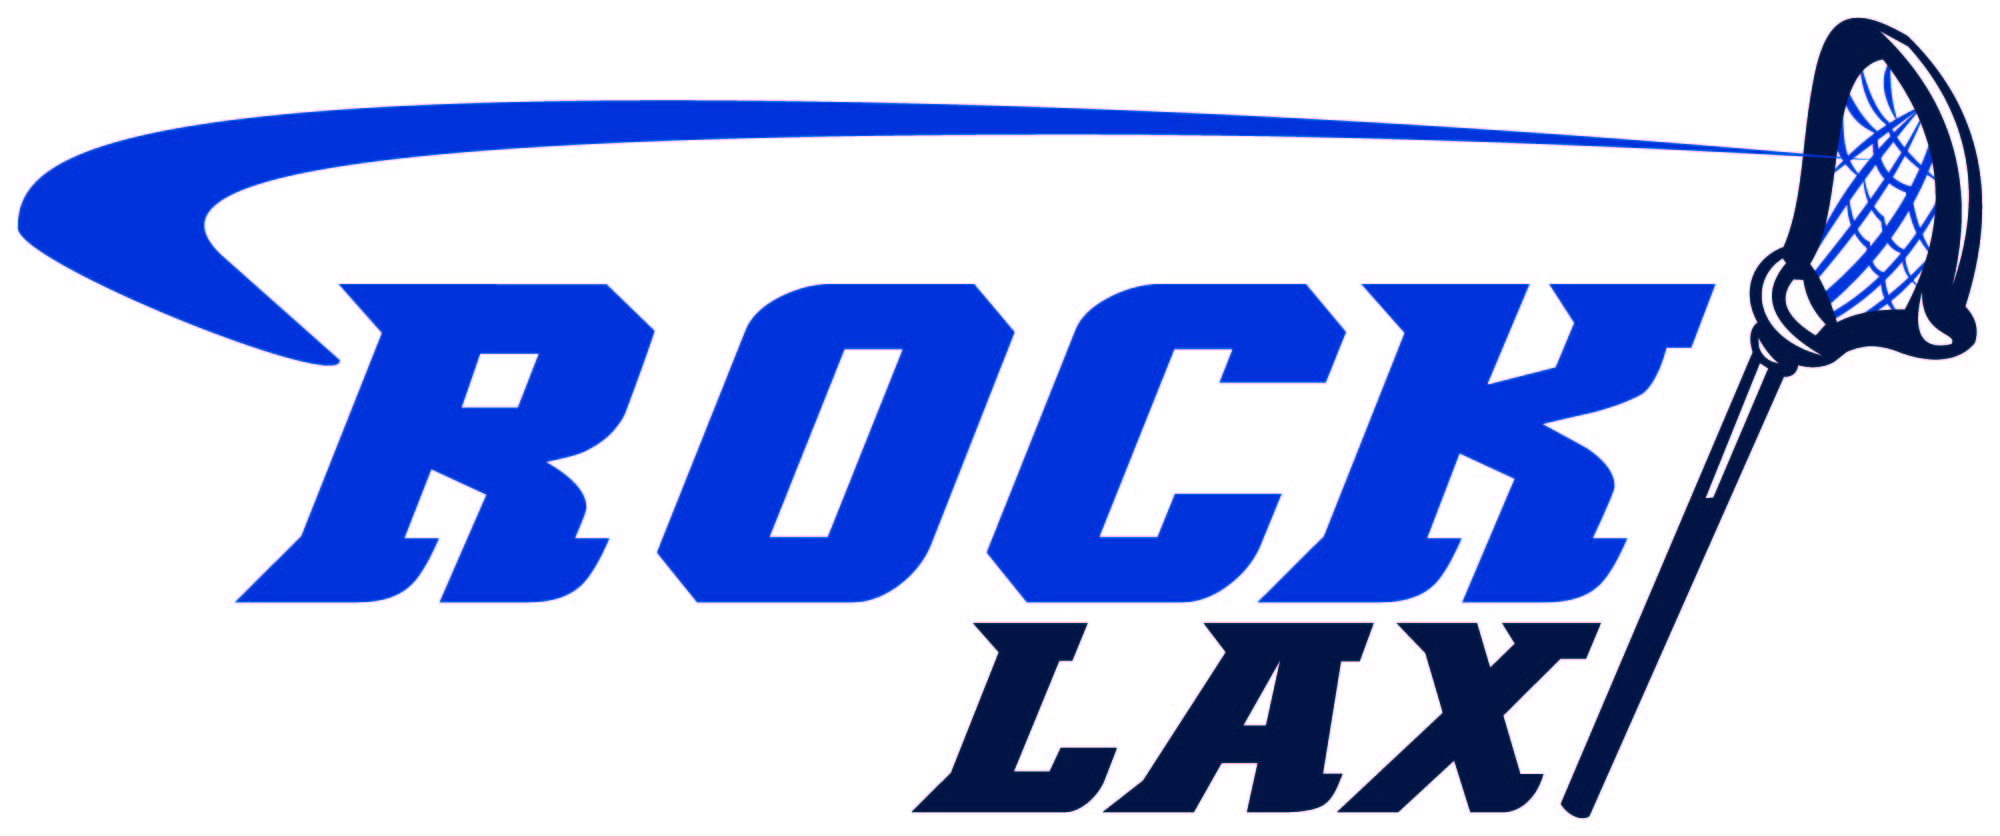 Council Rock Youth Lacrosse